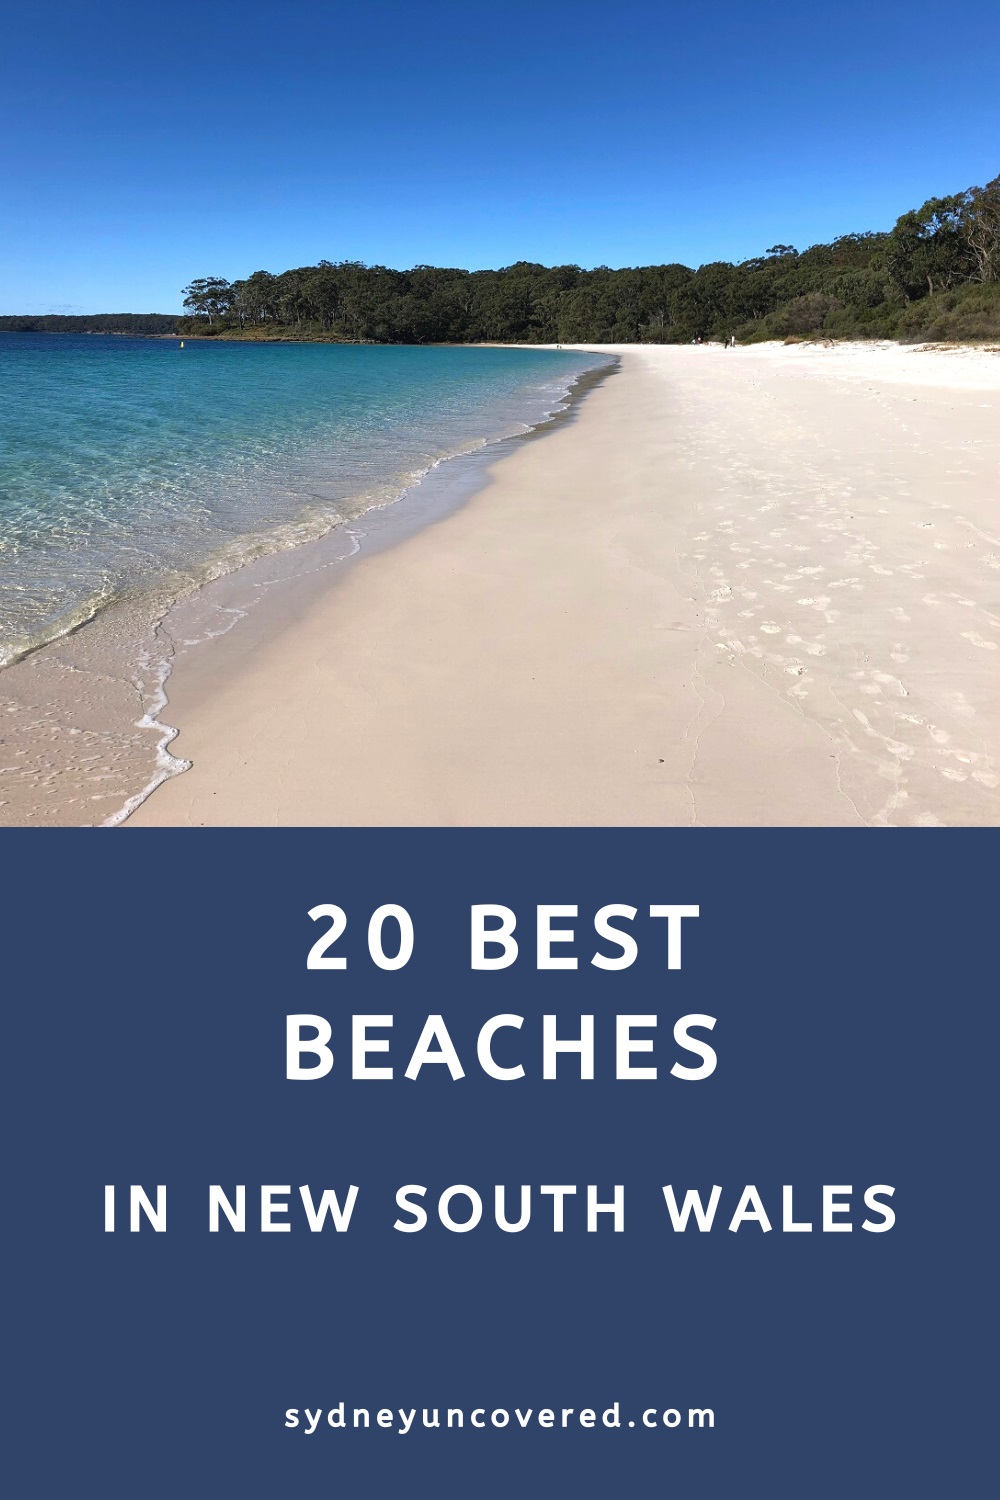 20 Best beaches in New South Wales